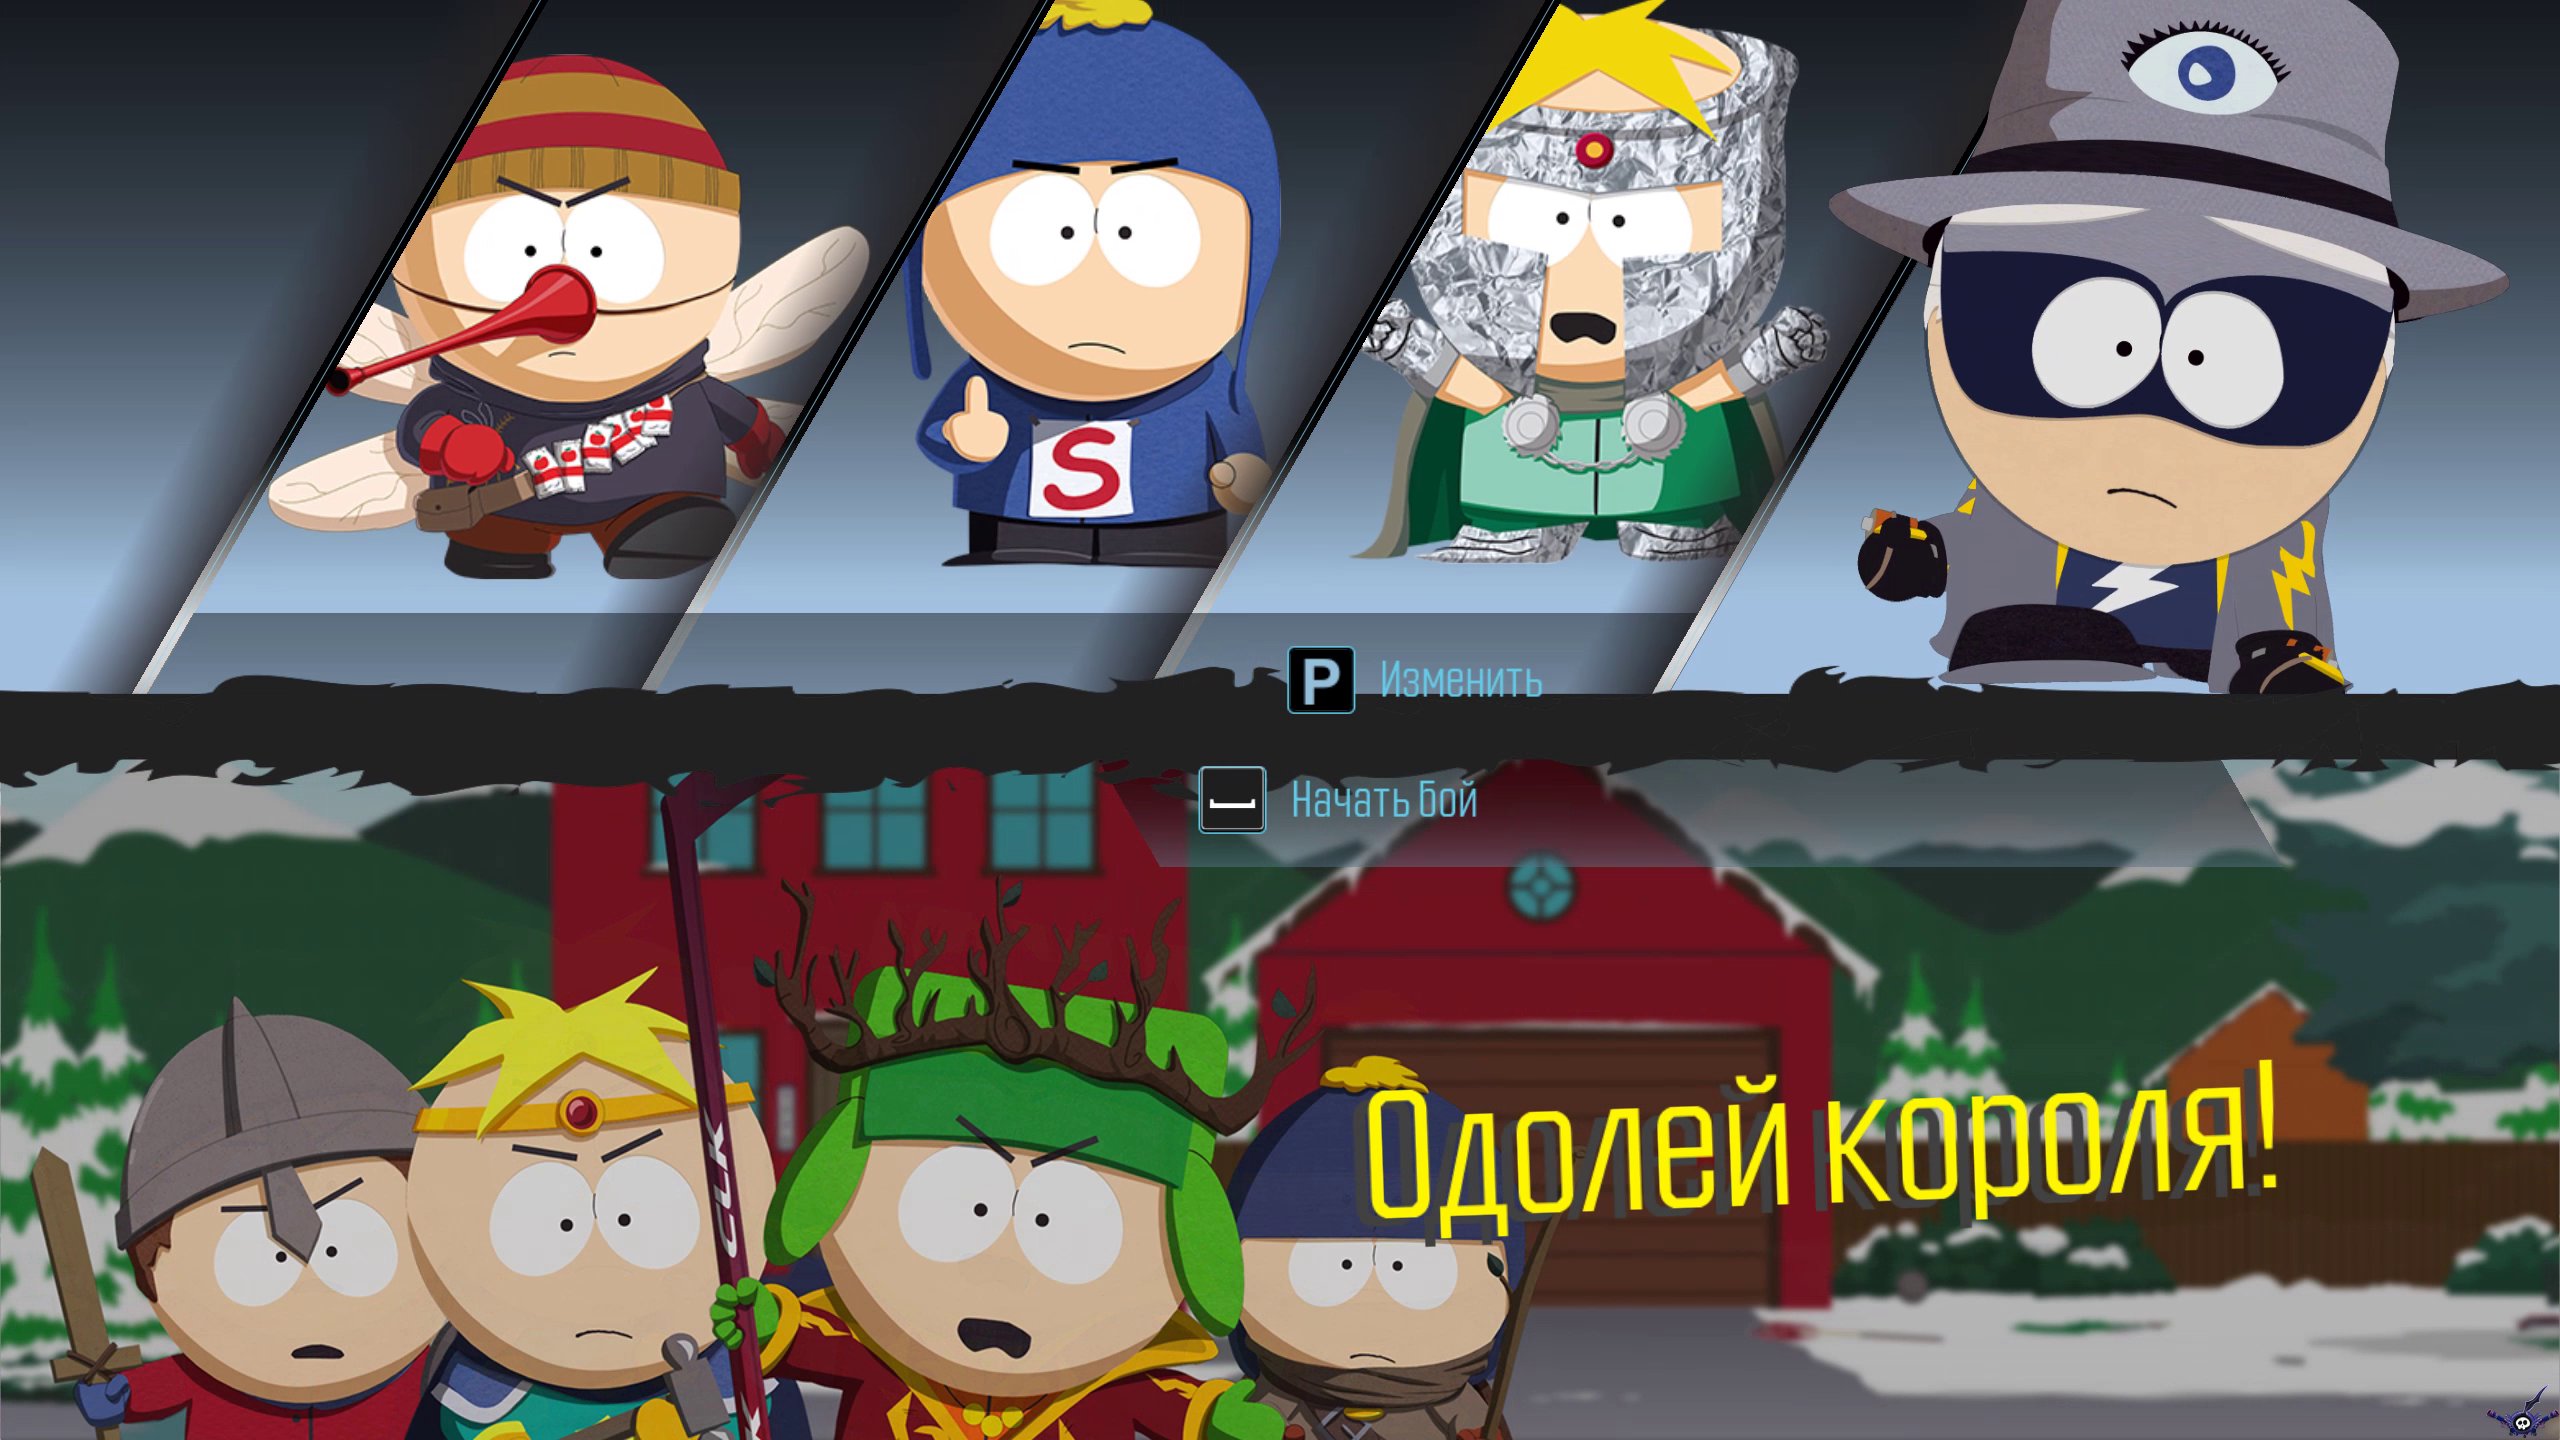 South park the fractured but whole купить ключ steam дешево фото 105